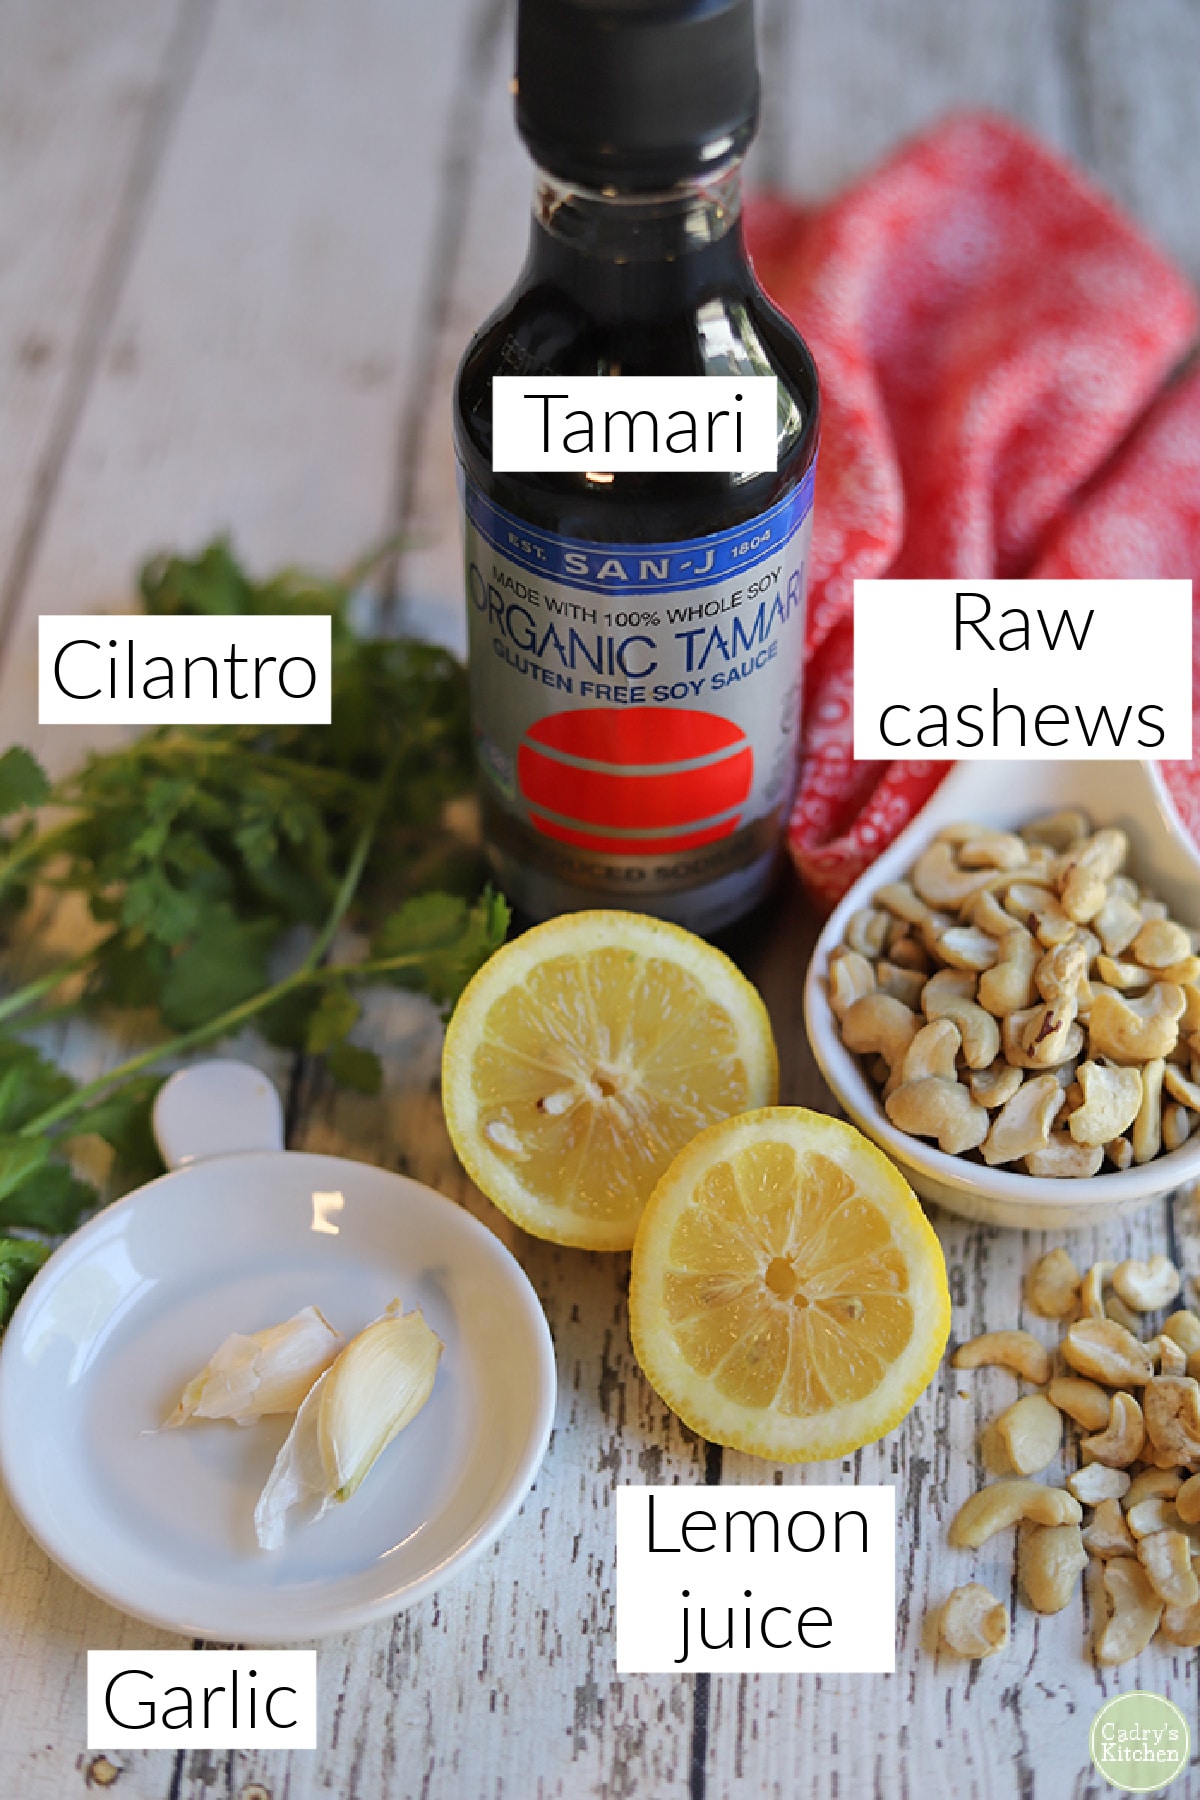 Labeled ingredients for creamy cashew dressing.